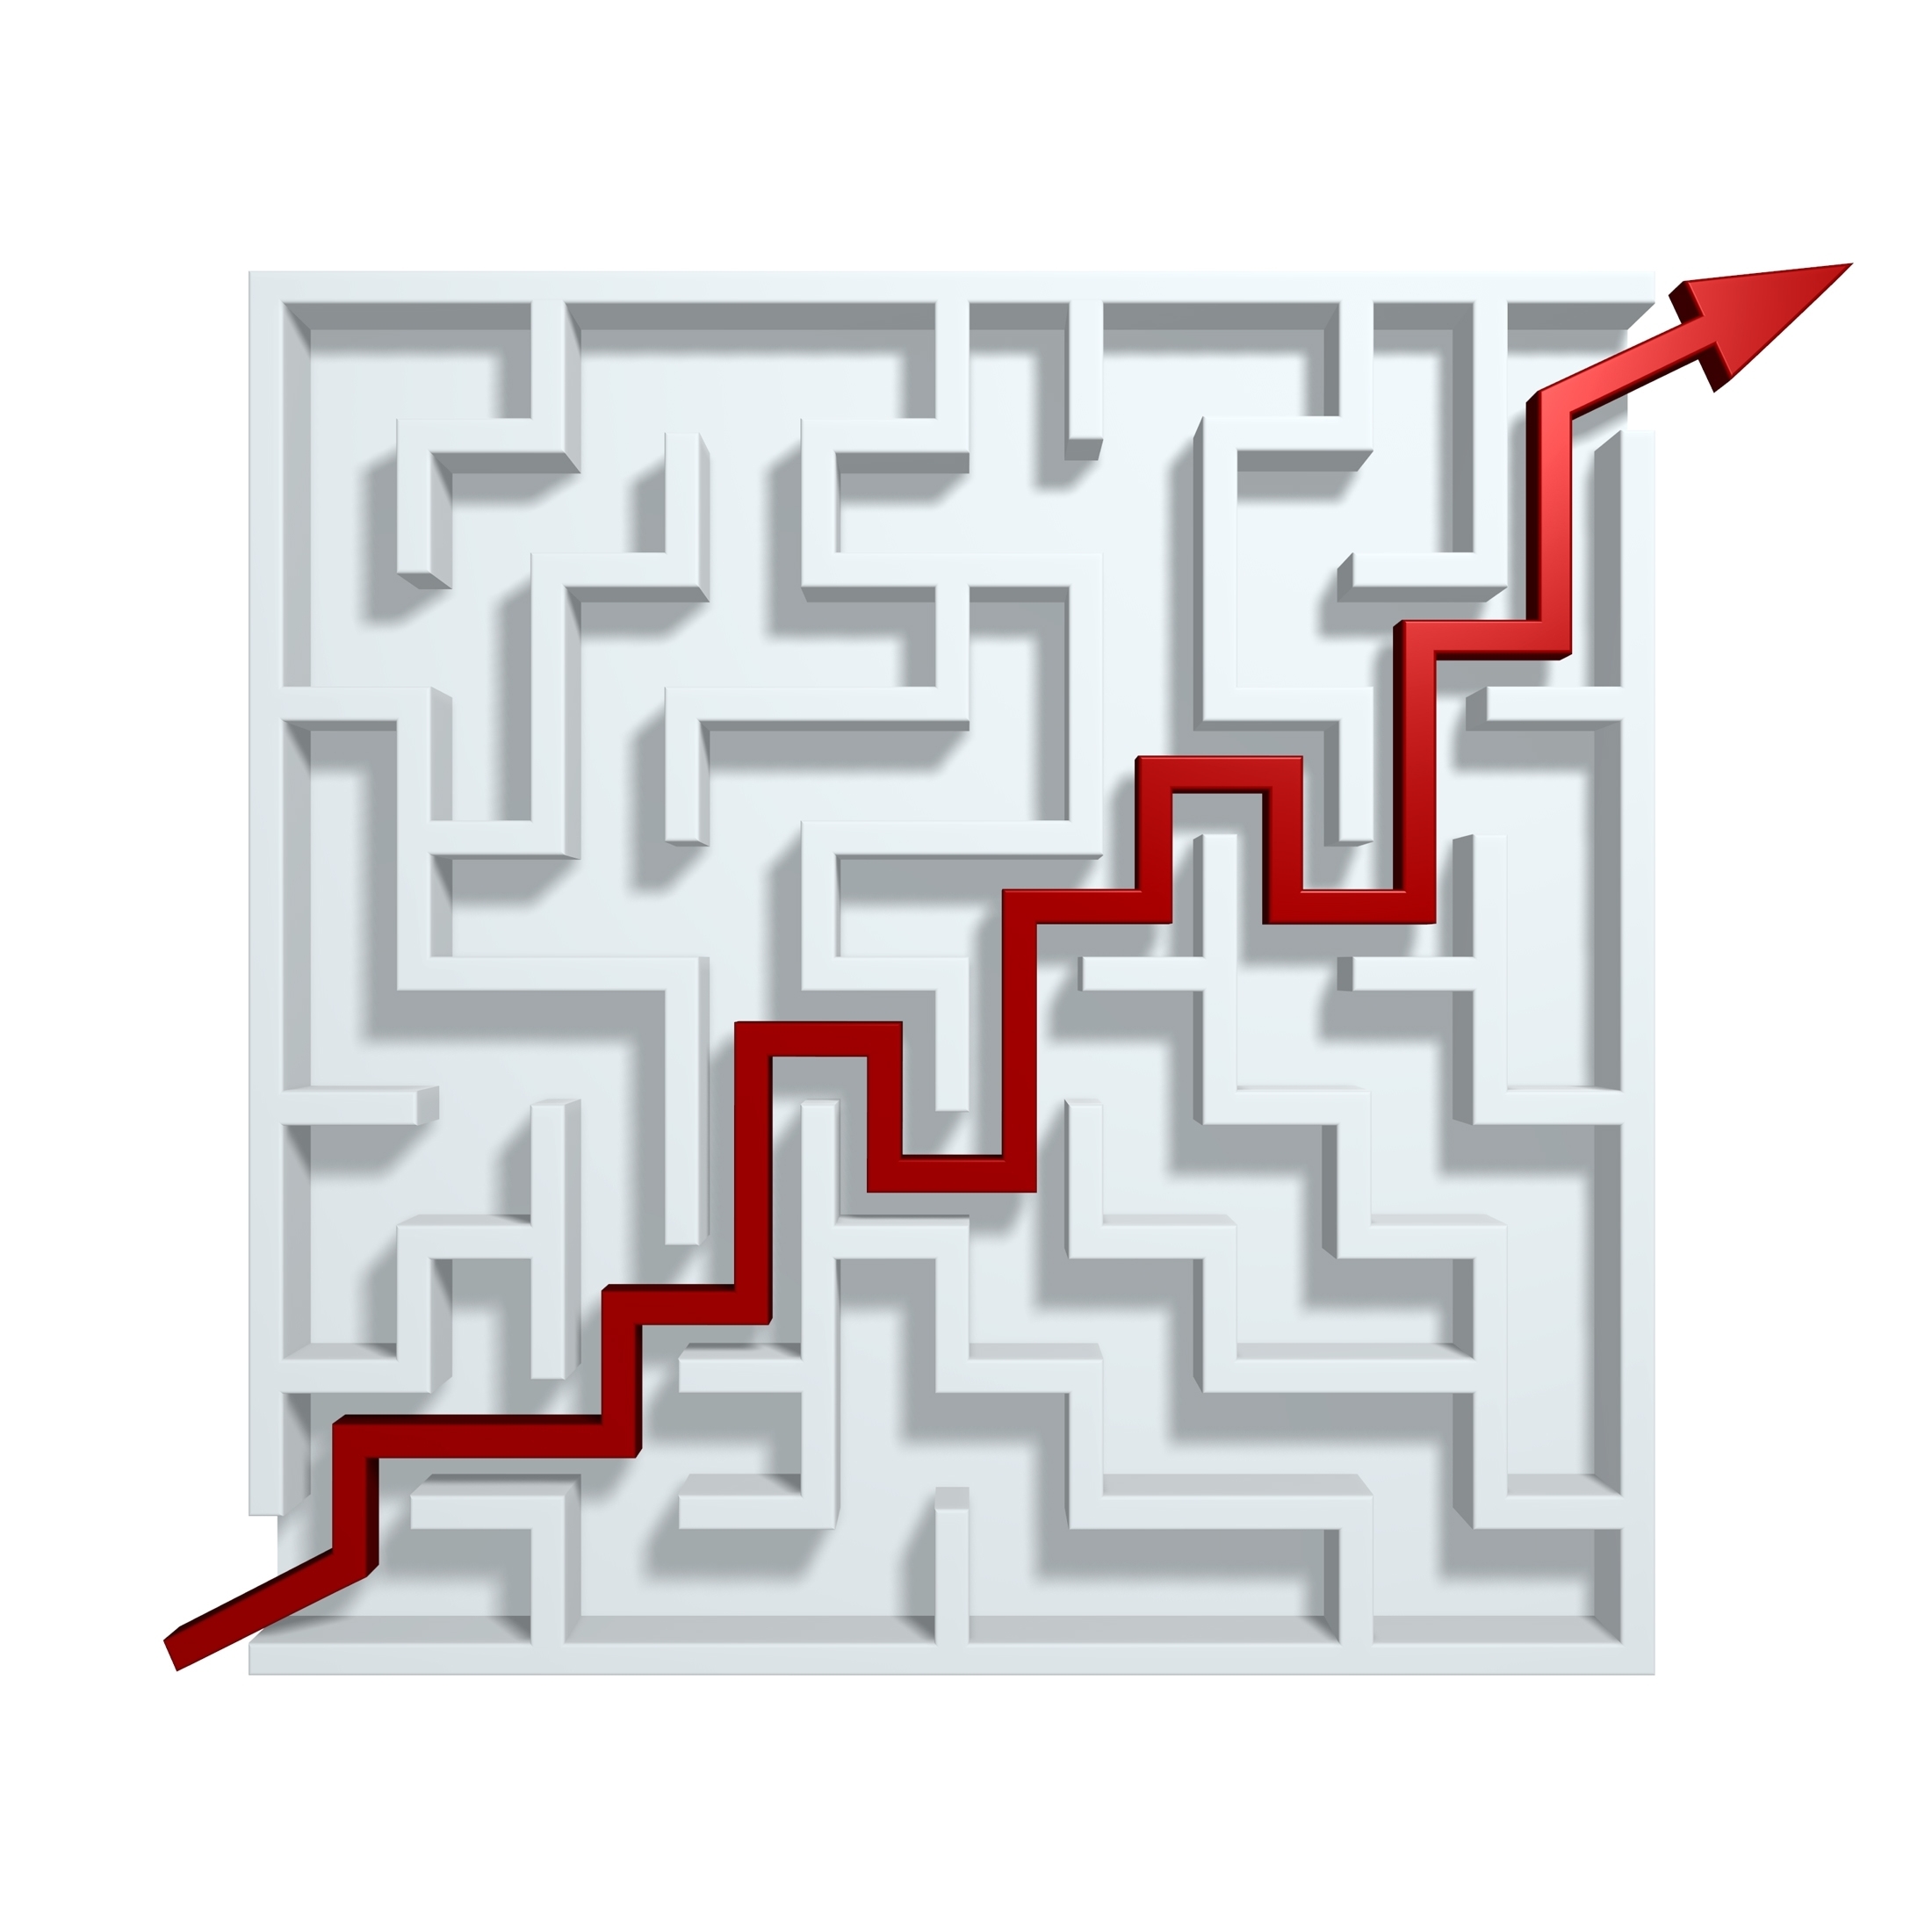 Maze with red arrow from start to finish